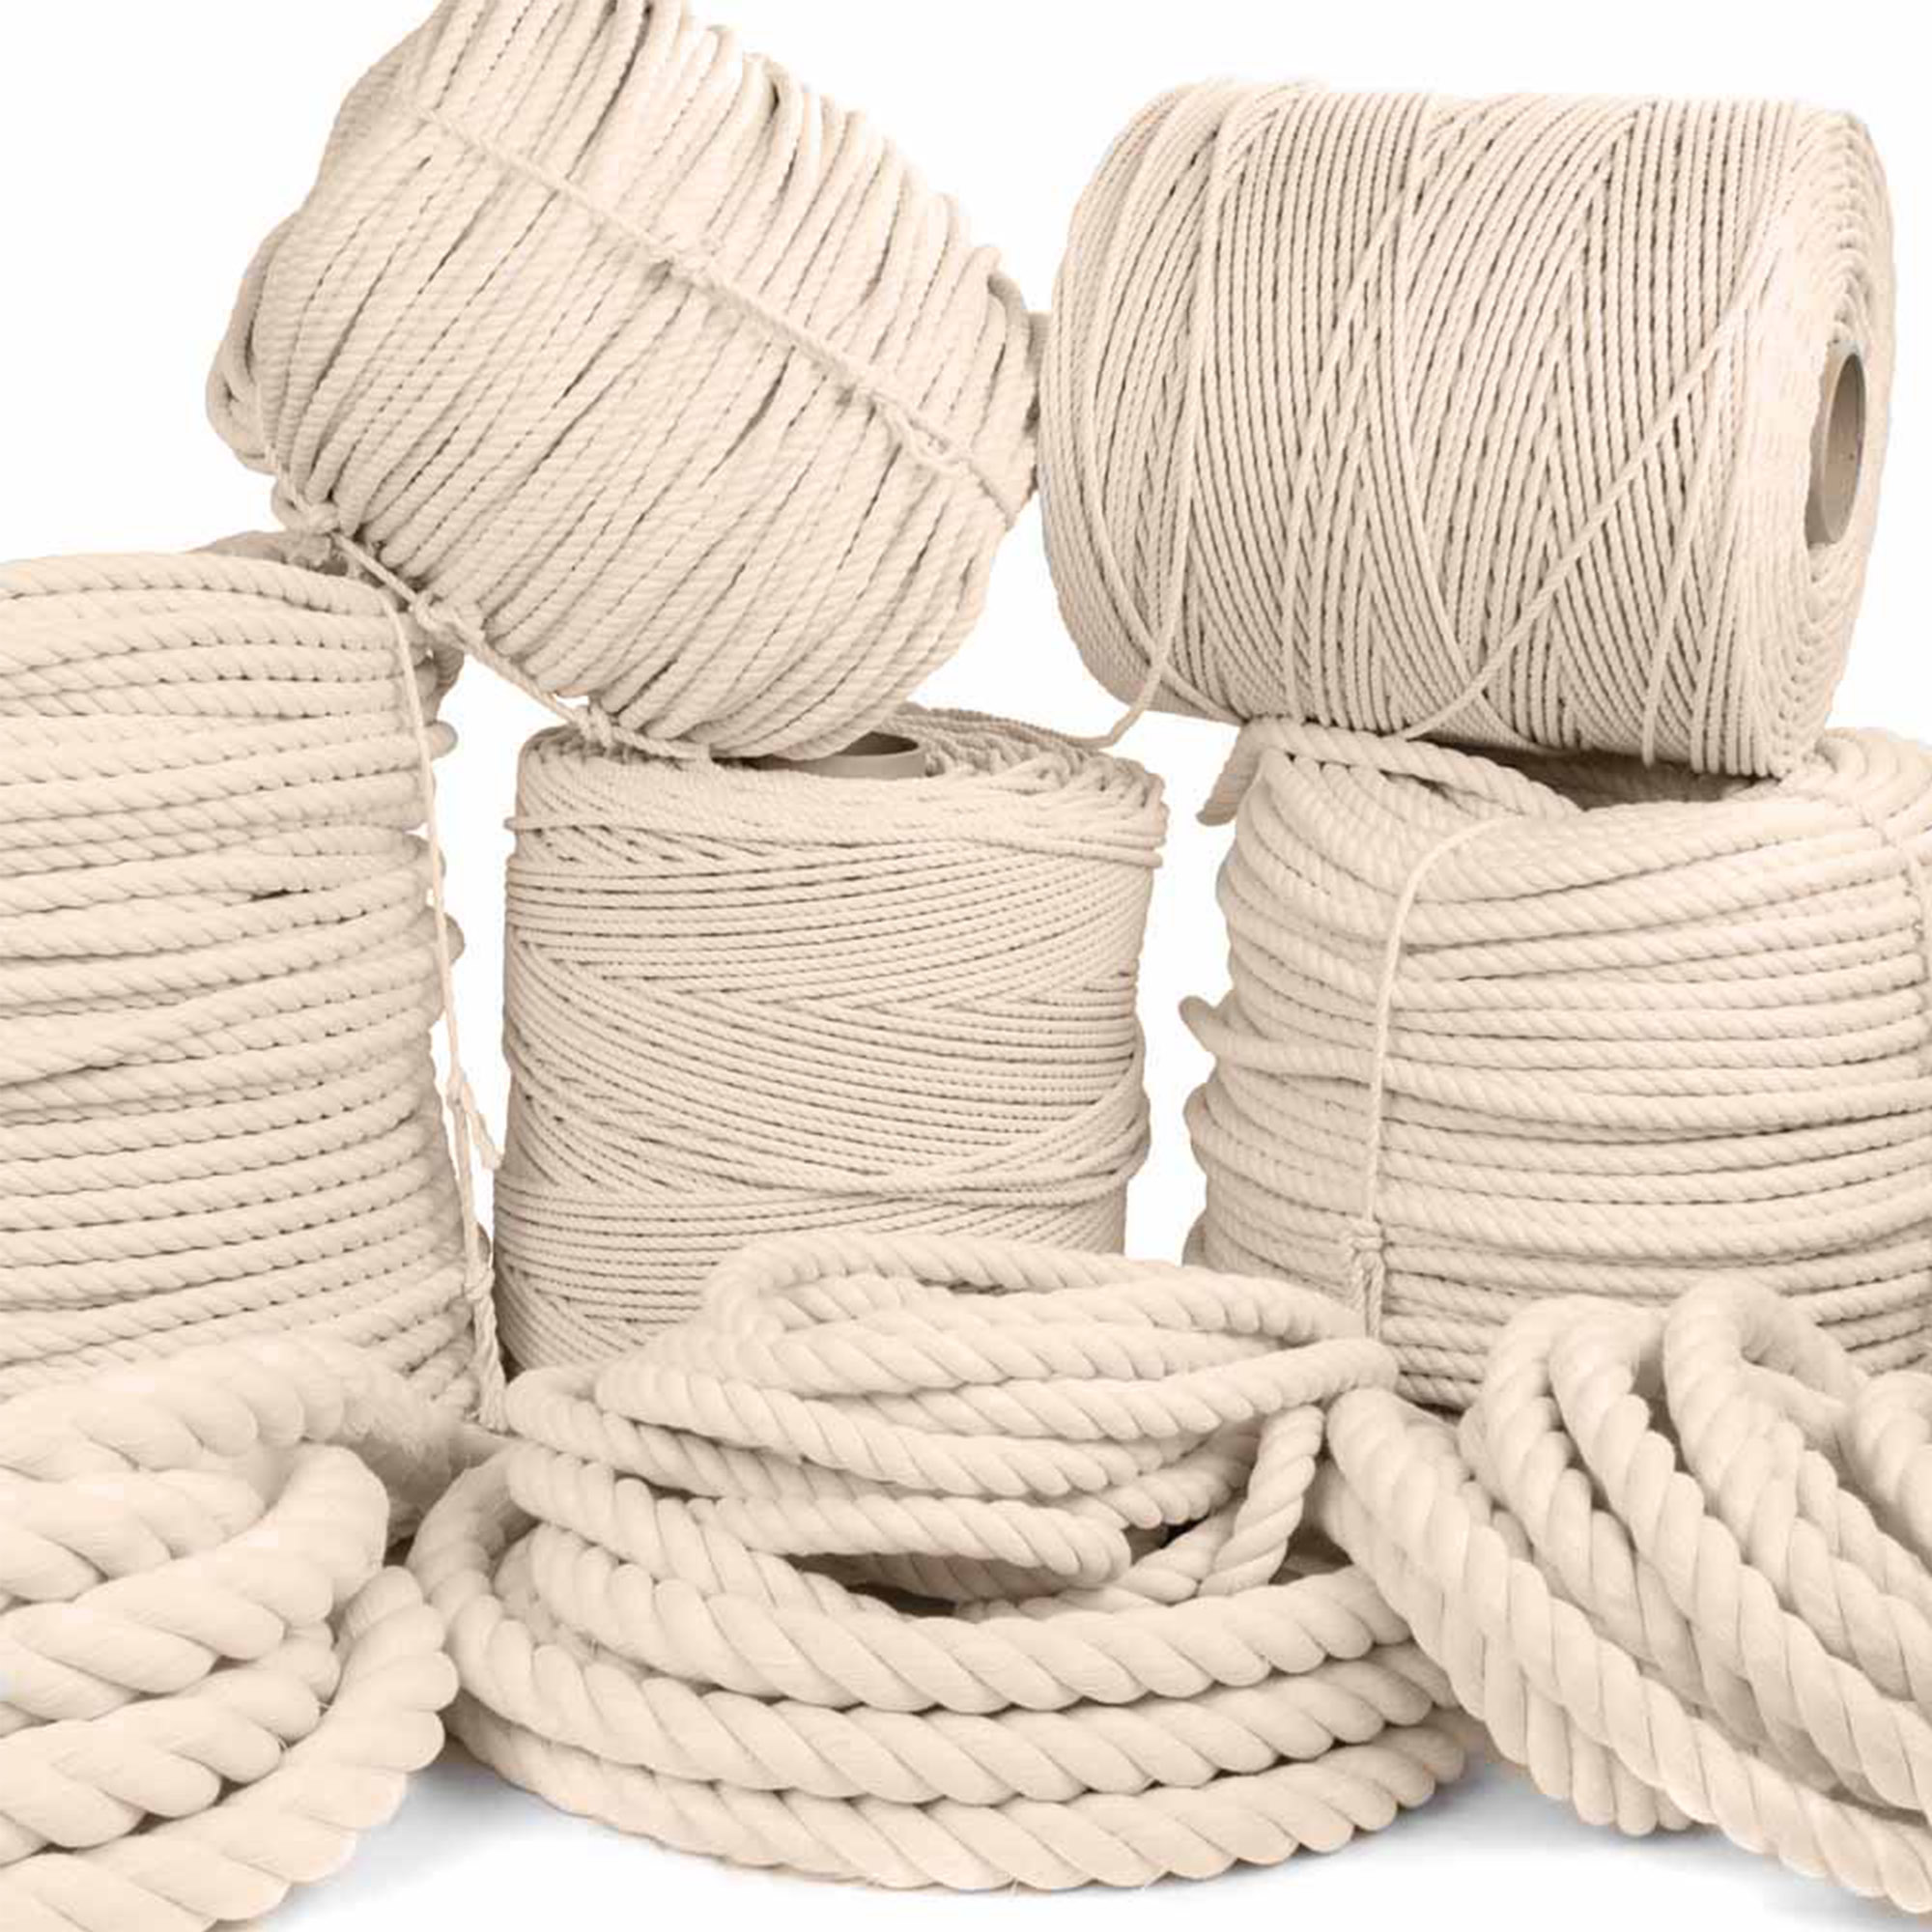 Golberg 100% Natural Cotton Rope - 5/32, 3/16, 7/32, 1/4, 5/16, 3/8, 1/2, 5/8, 3/4, 1, 1-1/4, and 1-1/2 Inch Diameters - Twisted White Cotton Rope - Several Lengths to Choose From - image 1 of 4